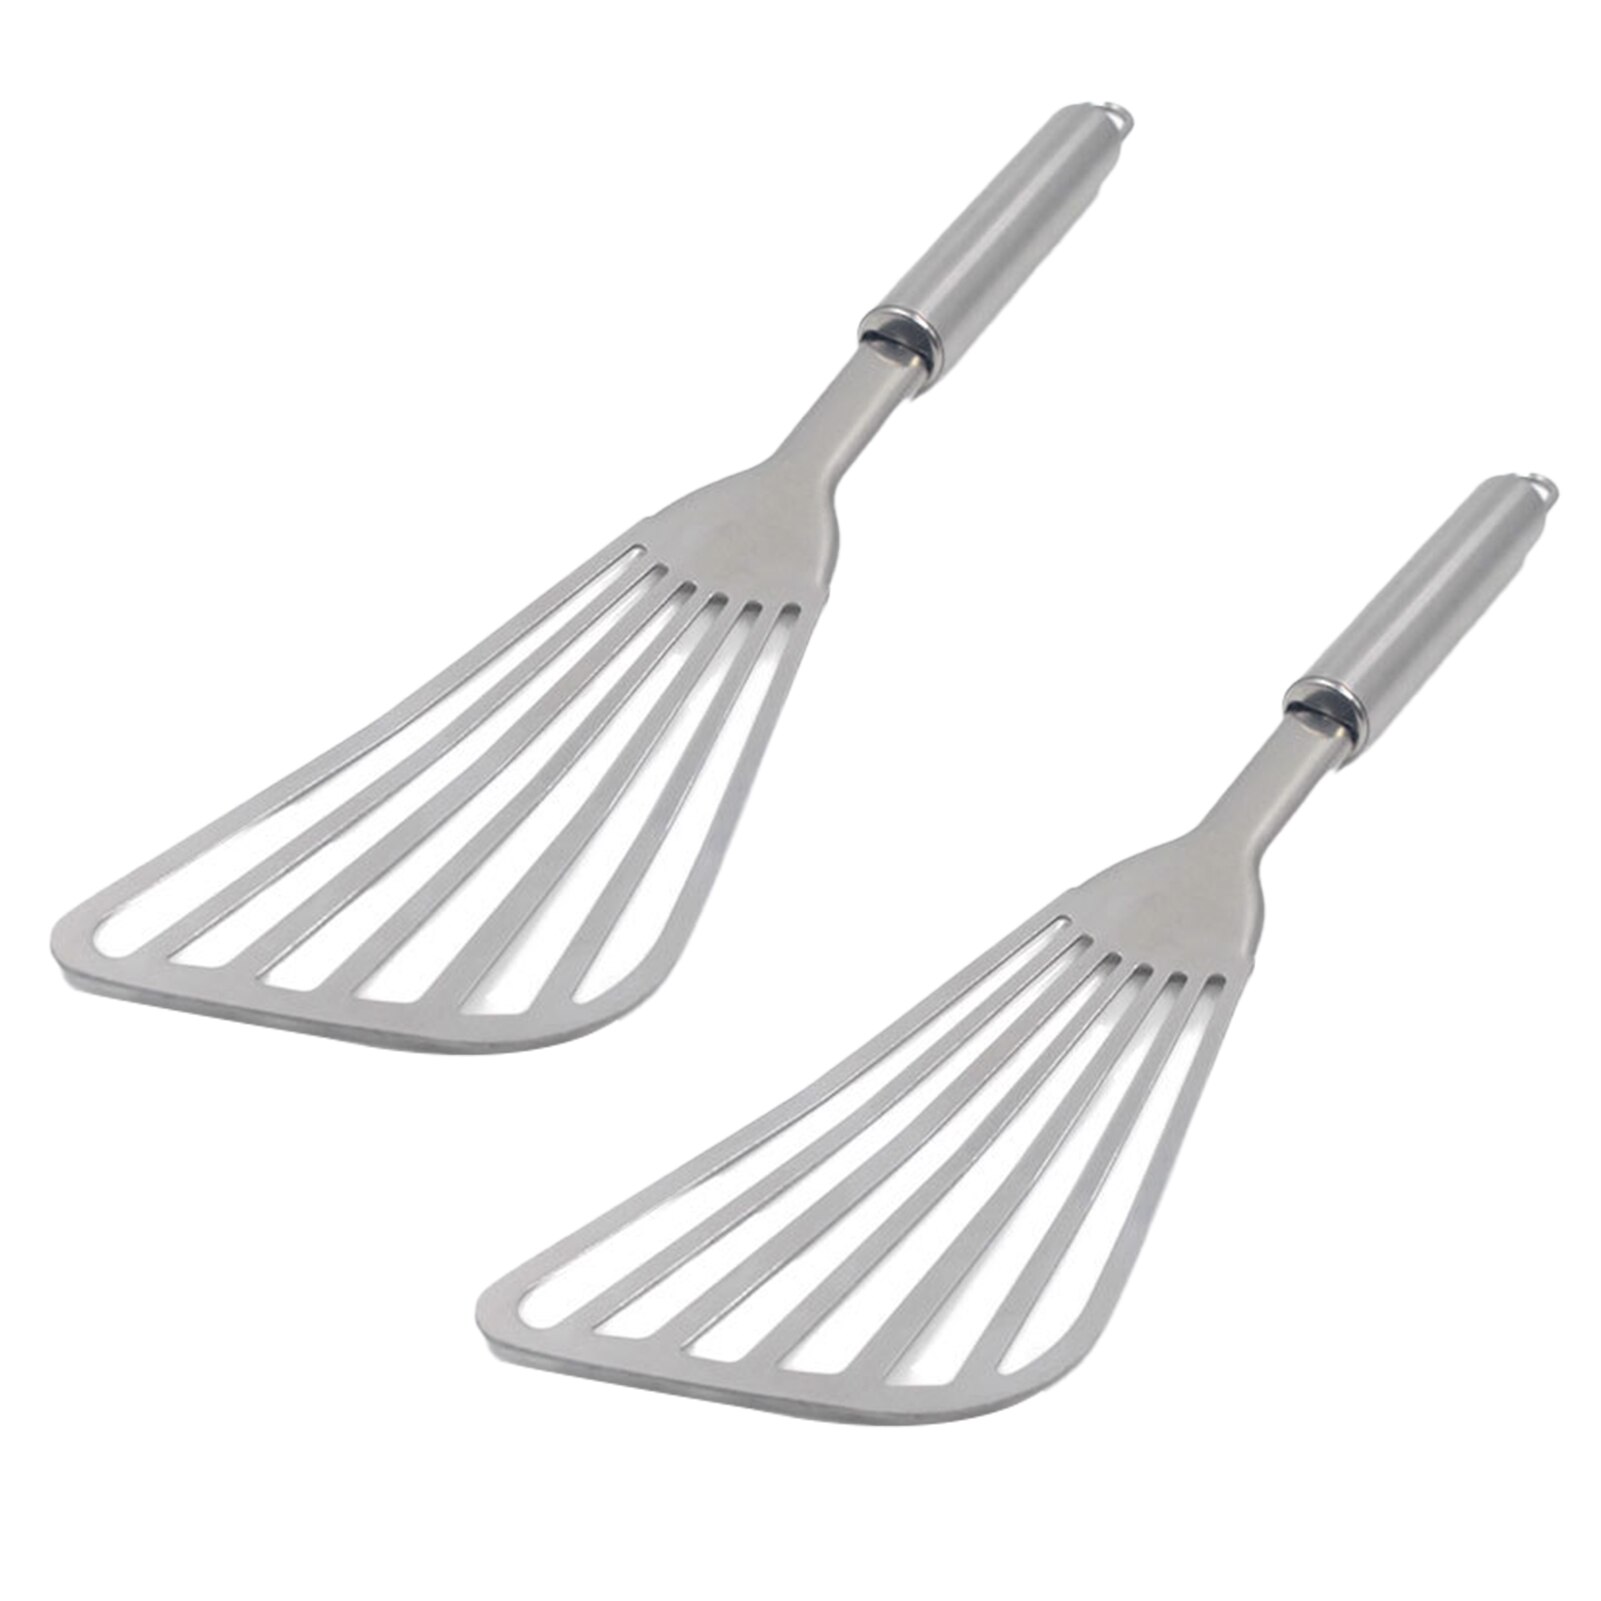 2pcs Fries Fish Spatula Slotted Turner Stainless S...